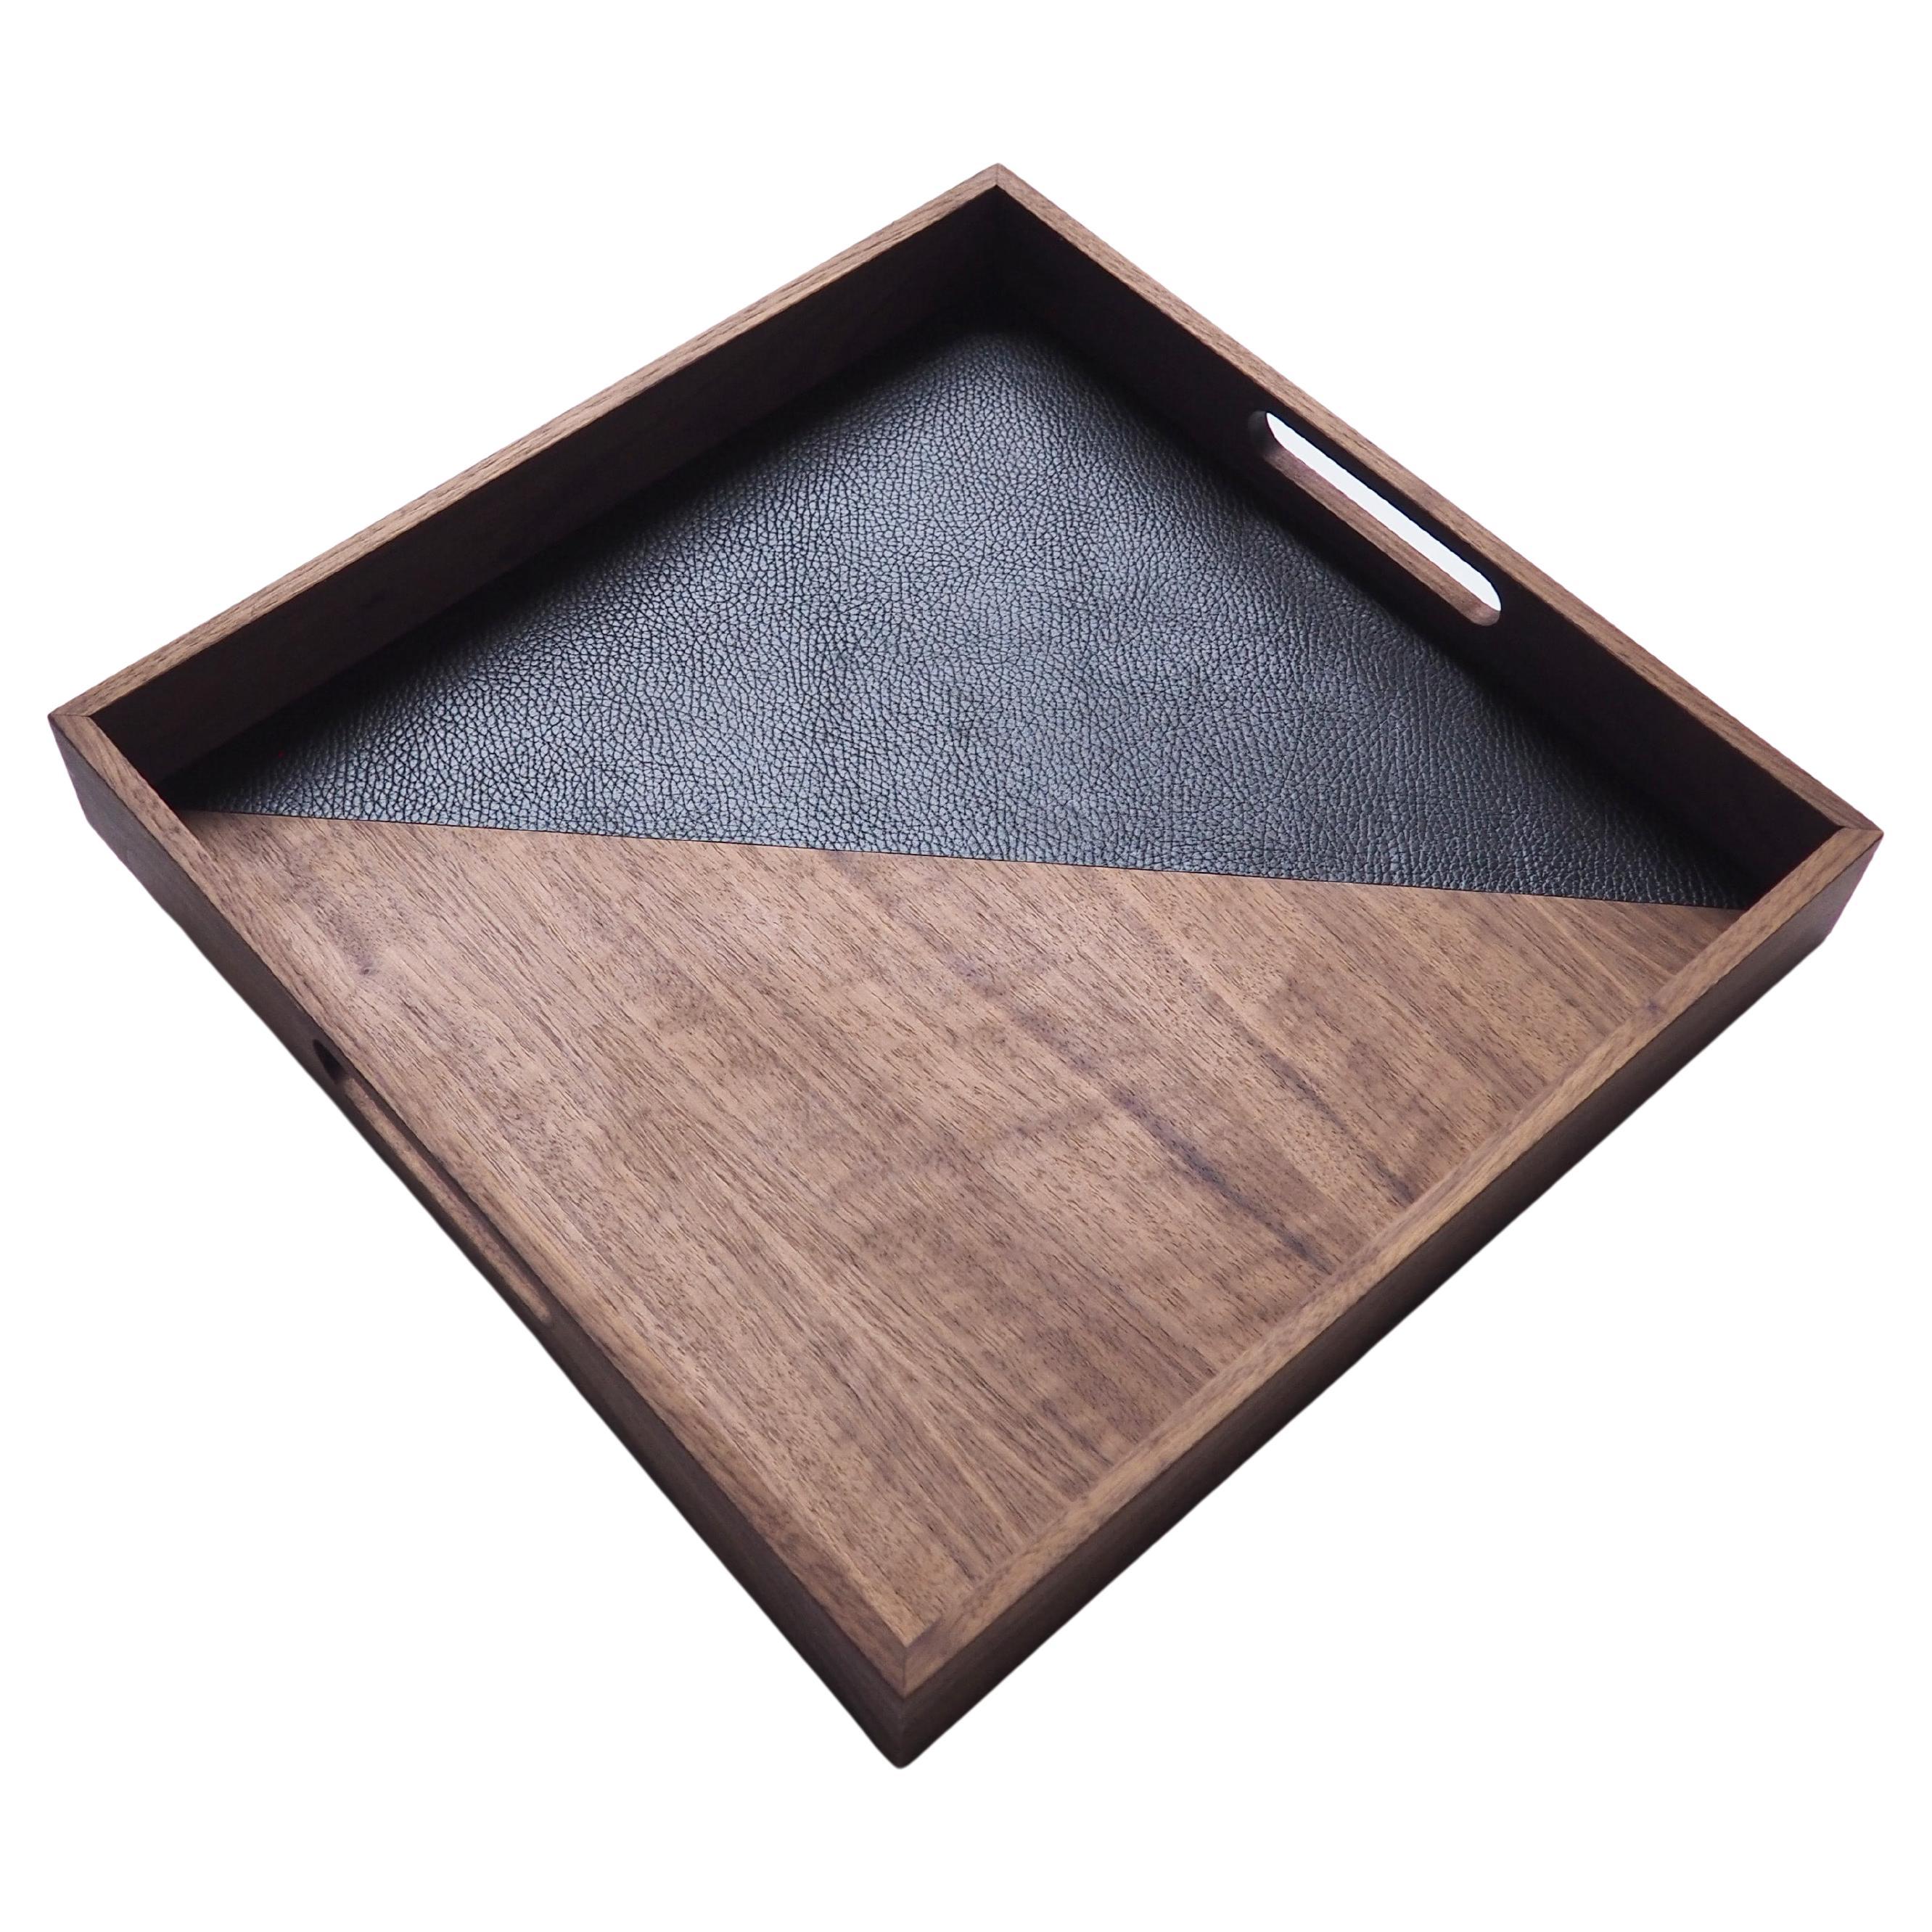 "After Hours" Square tray in walnut and black leather by Atelier C.u.b For Sale